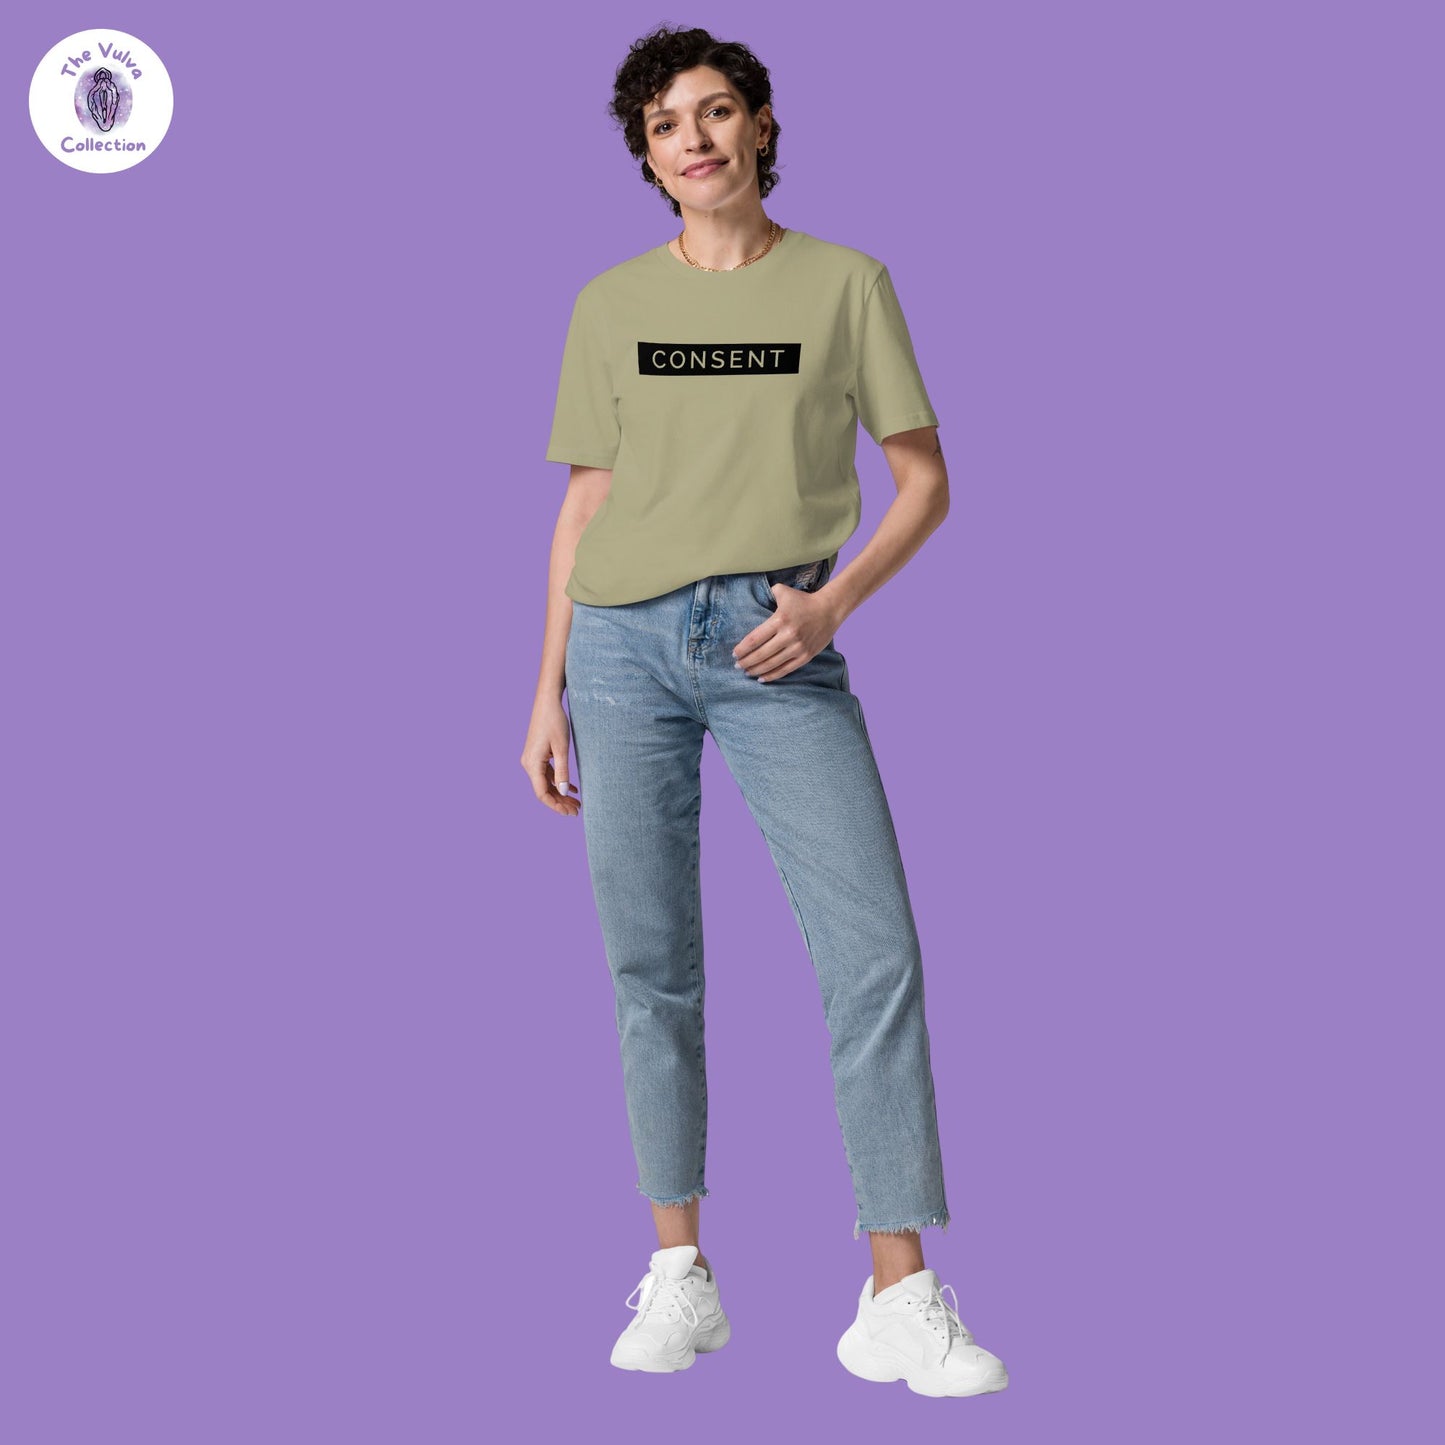 Consent is Simple Unisex Fit Organic T-Shirt